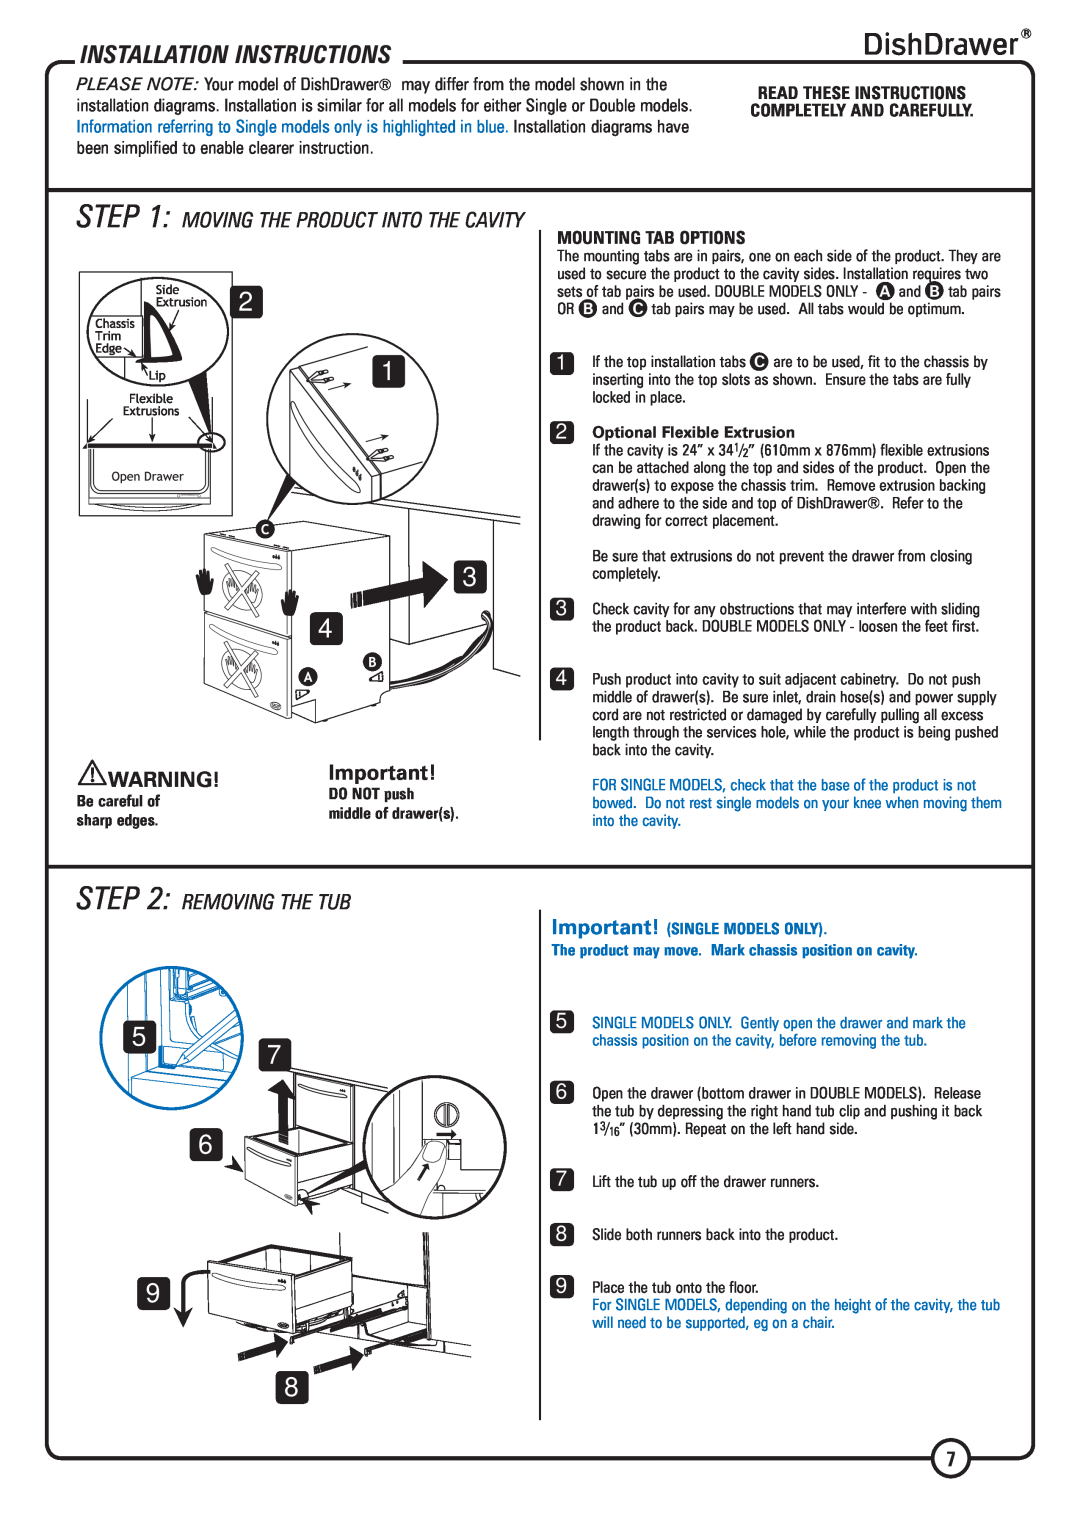 DCS DS224 Installation Instructions, Removing The Tub, Mounting Tab Options, Moving The Product Into The Cavity 